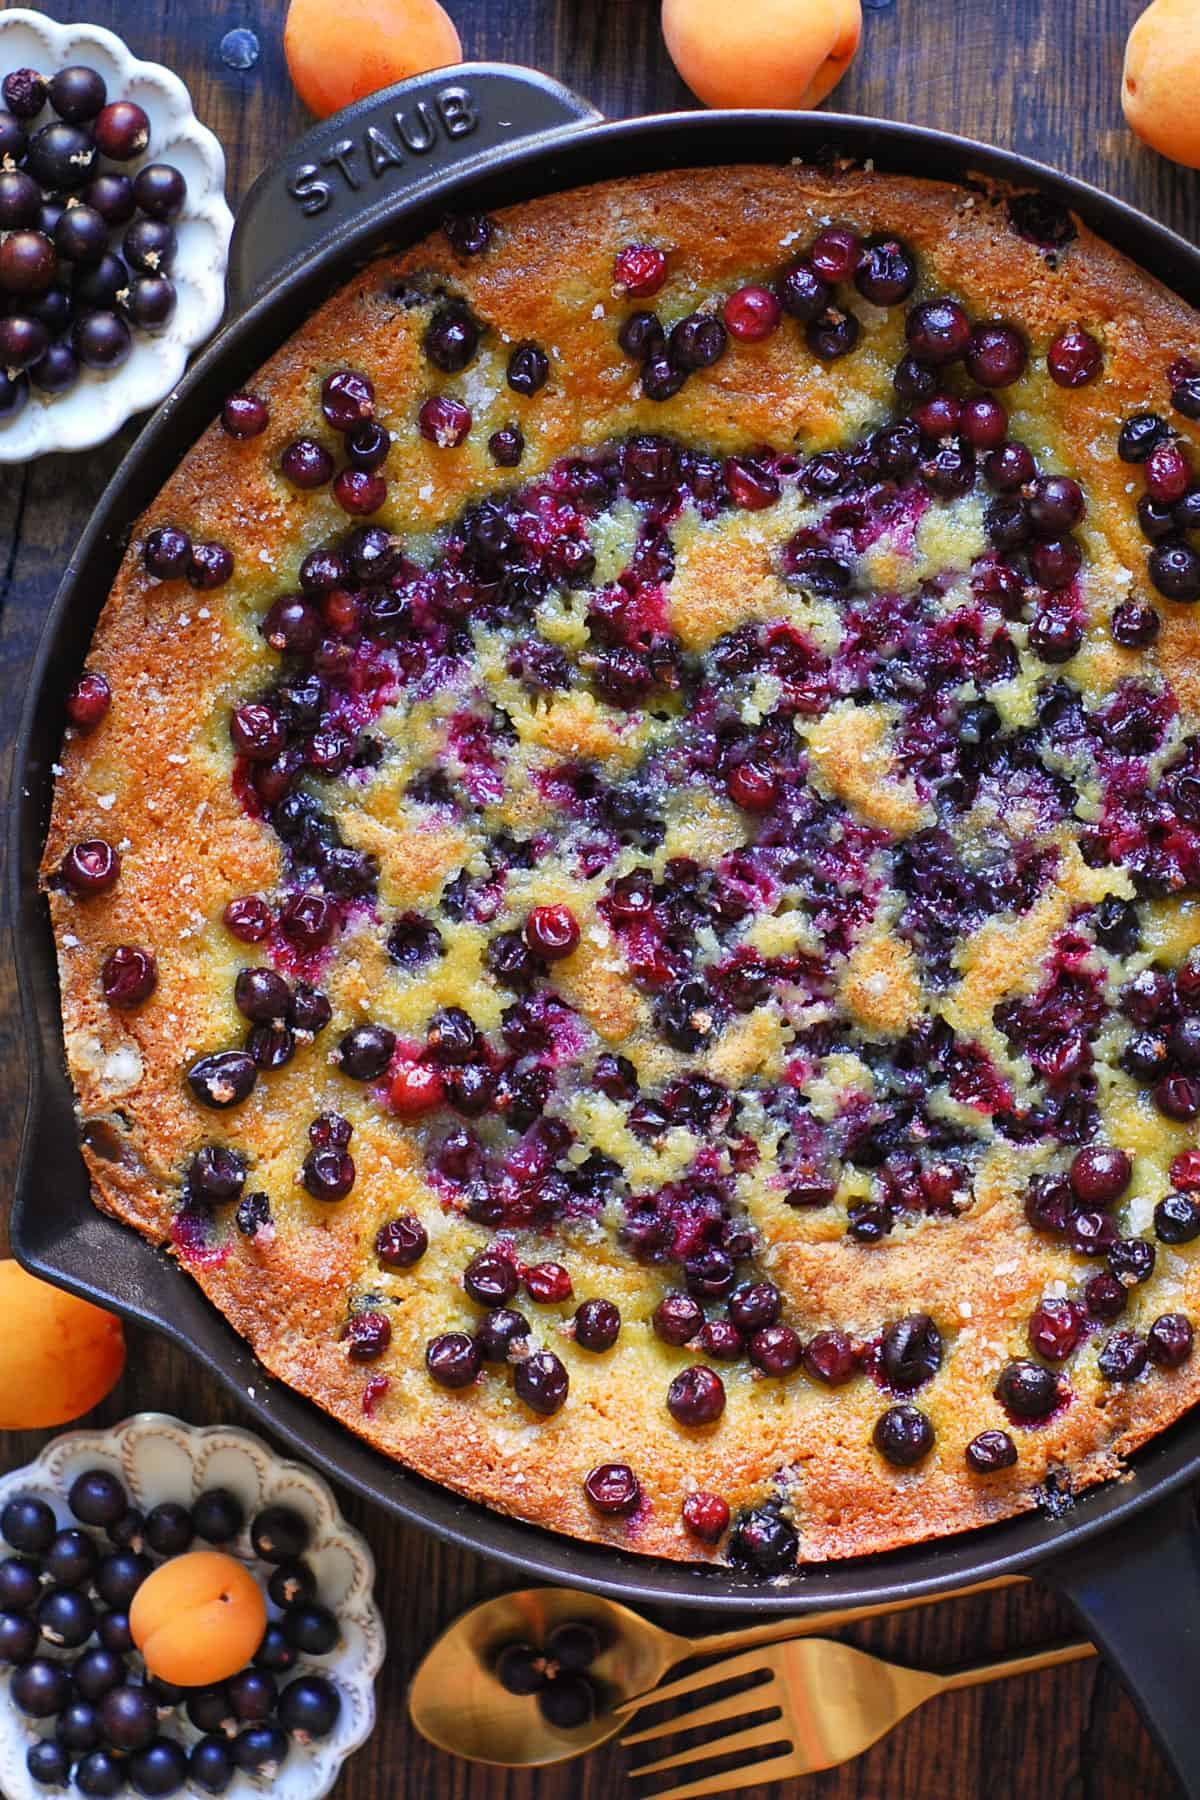 Black currant cake in a cast iron skillet.